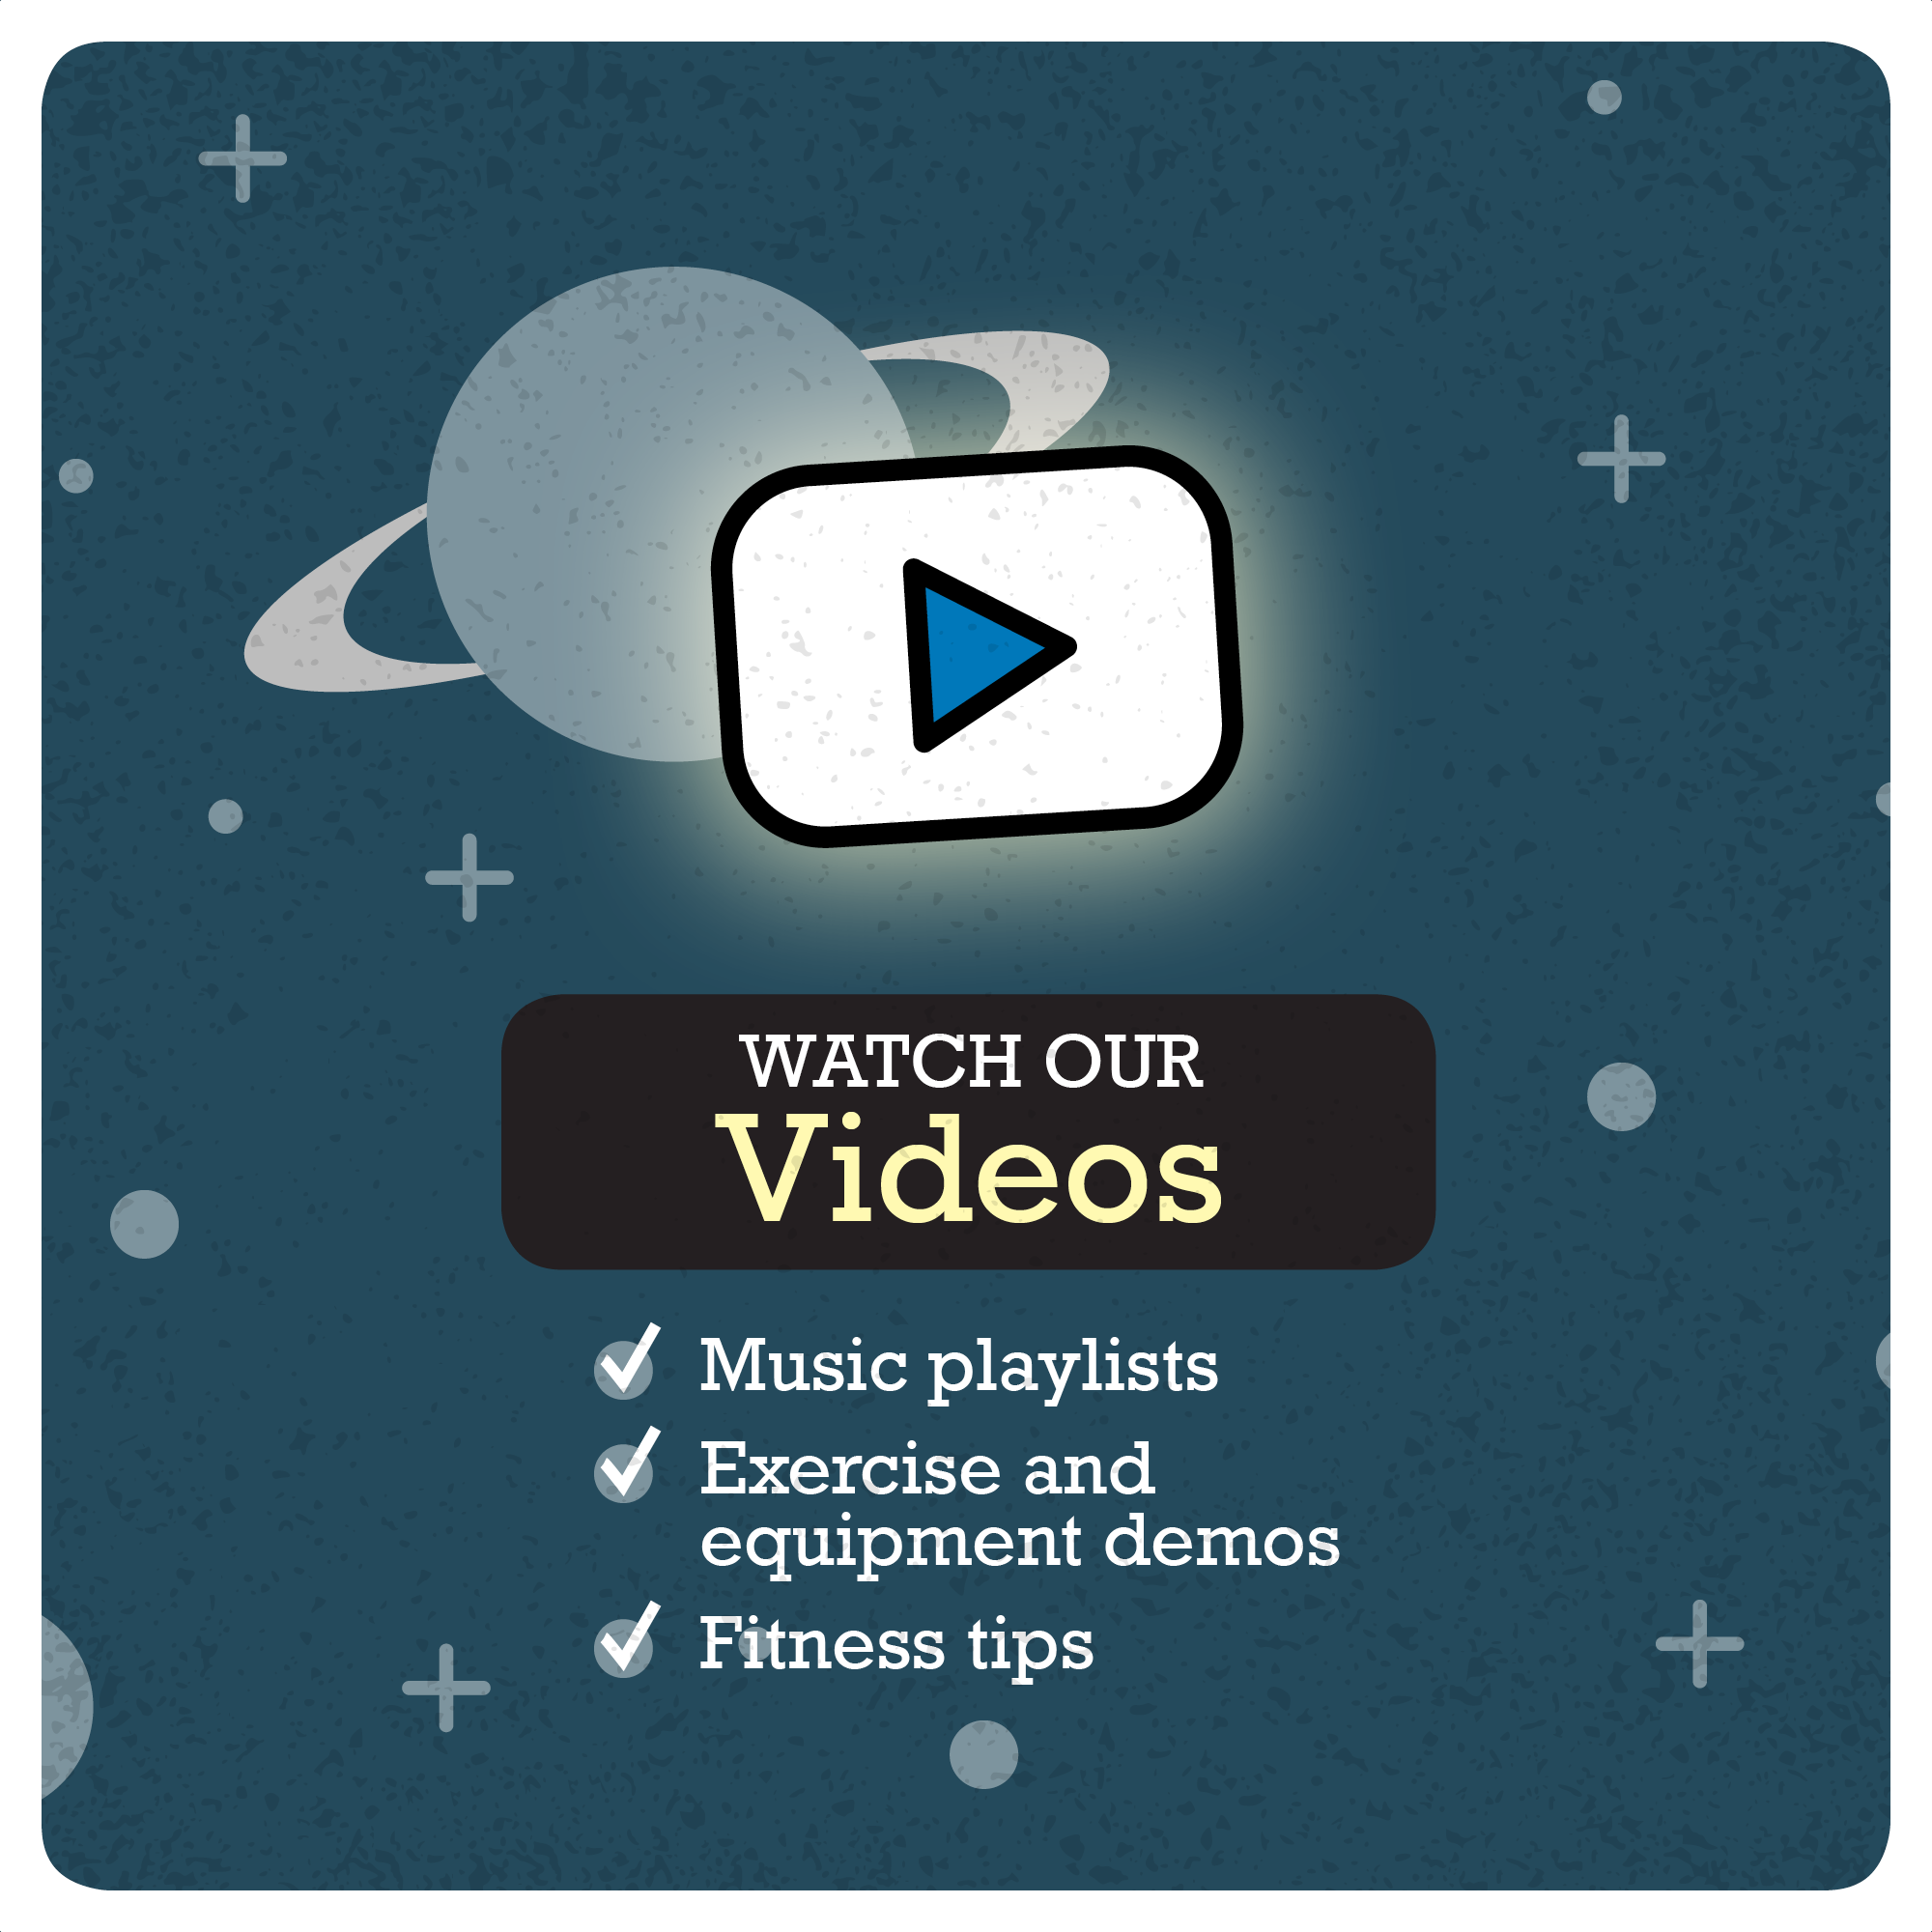 Watch our videos